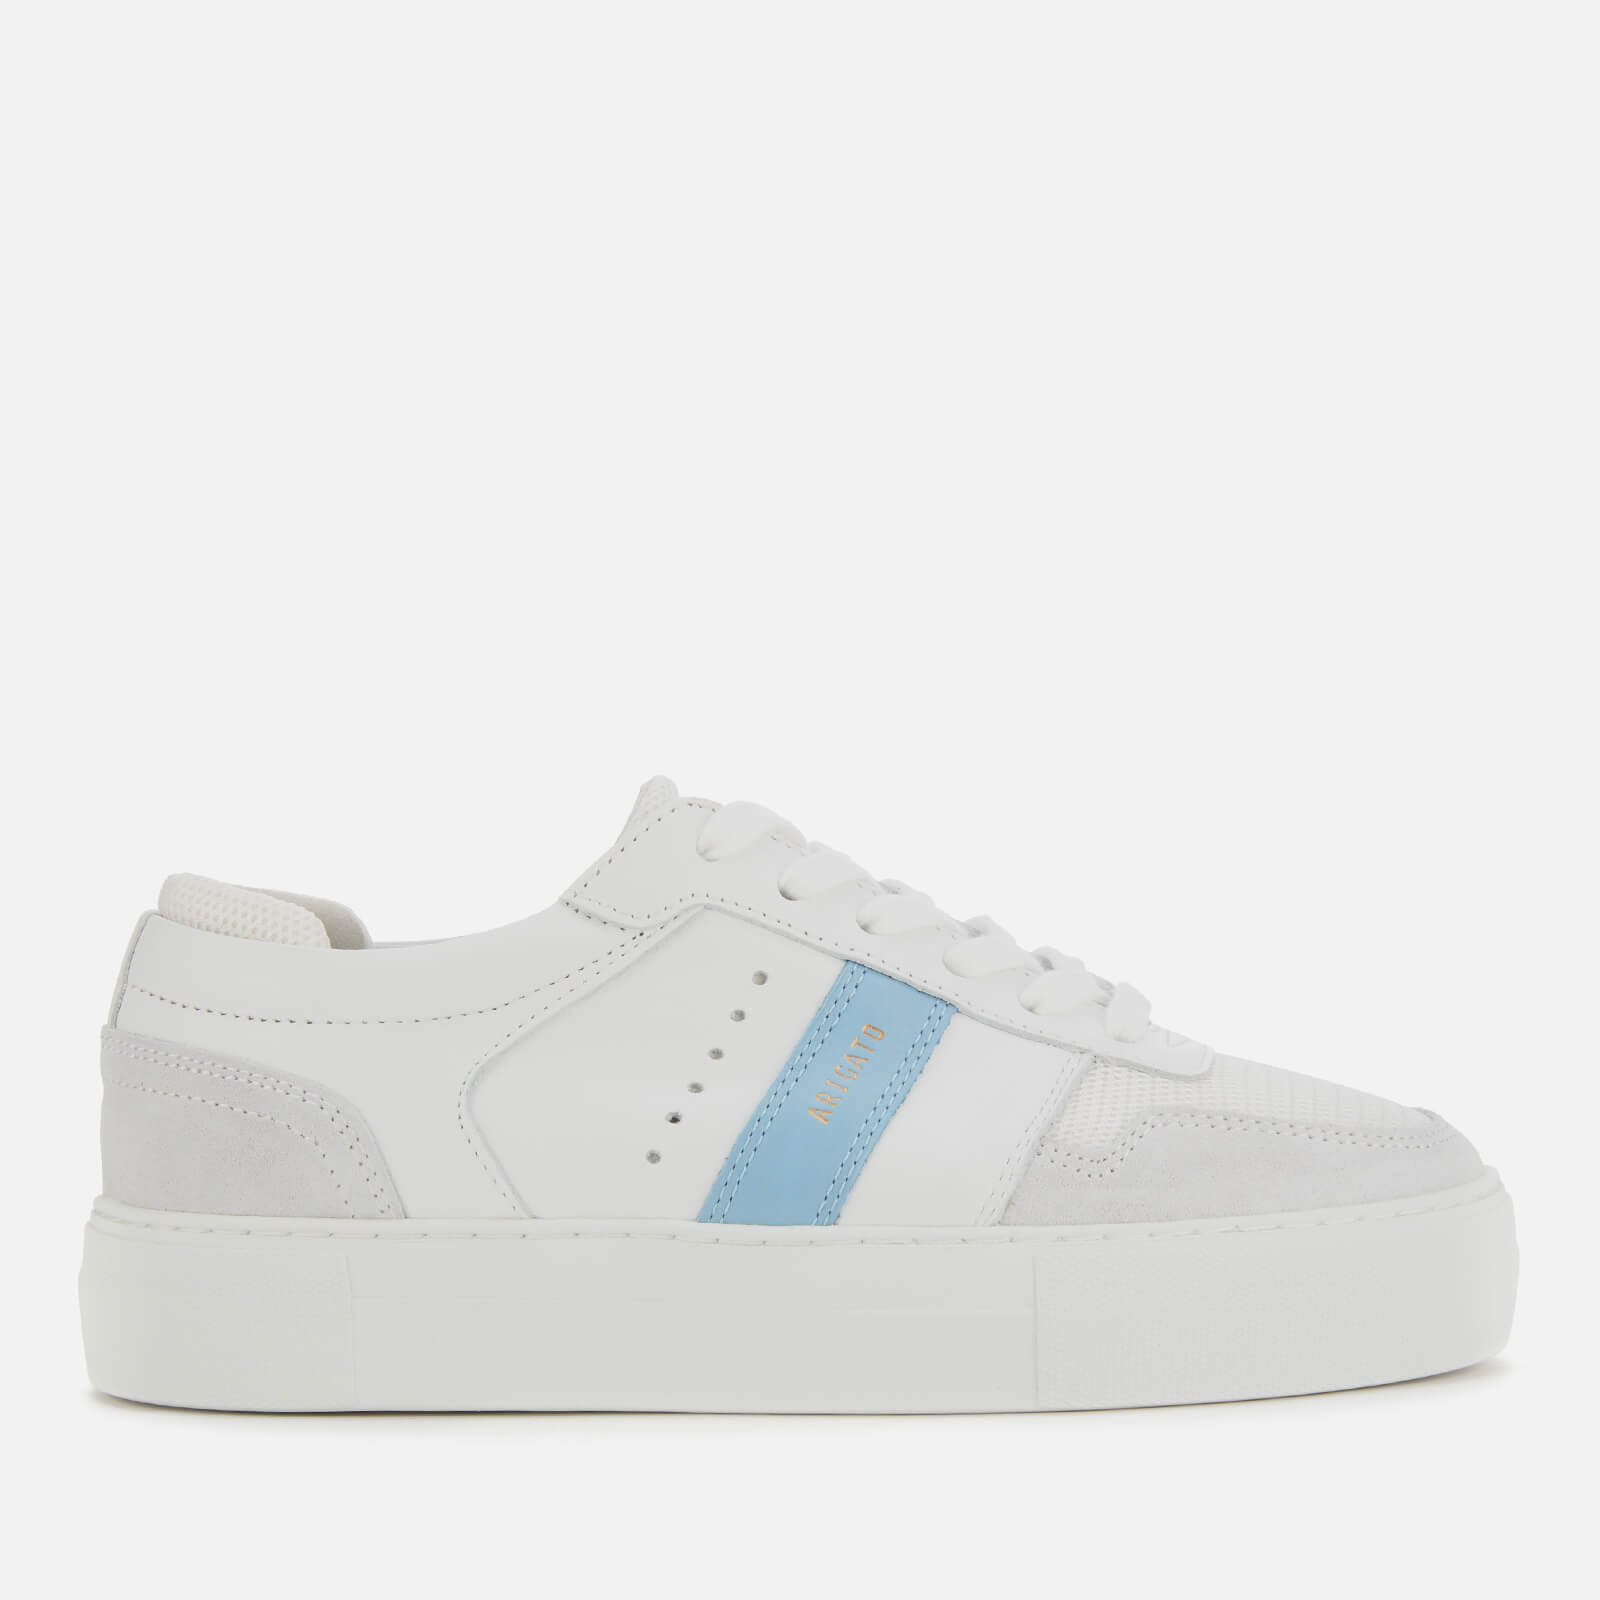 Axel Arigato Women's Detailed Leather Platform Trainers - White/Dusty Blue - UK 3.5